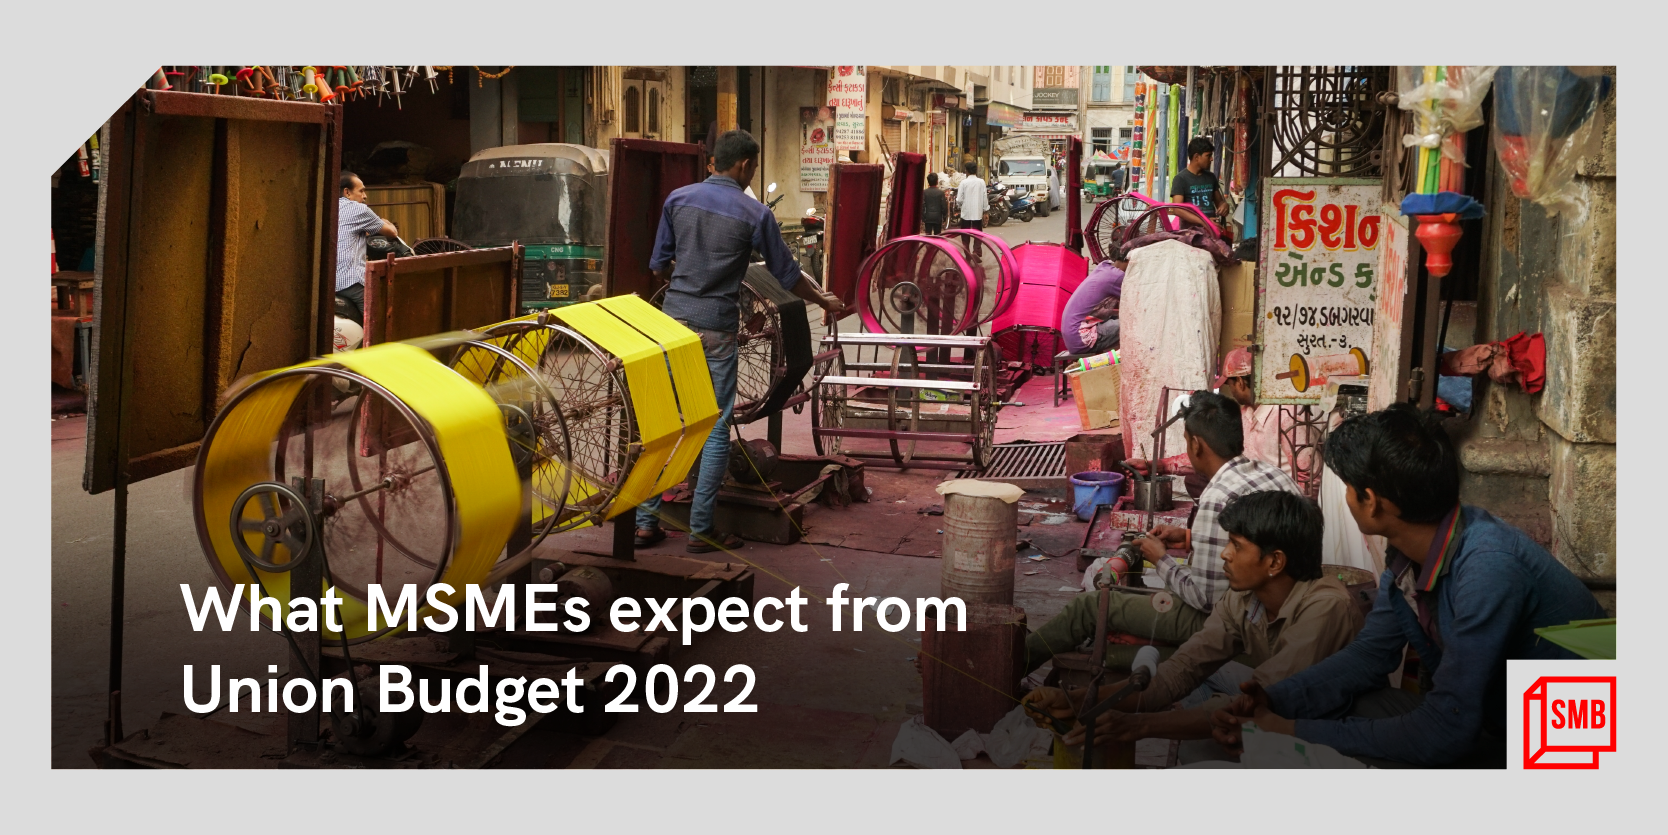 Here is what MSMEs, the backbone of Indian economy, expect from Union Budget 2022